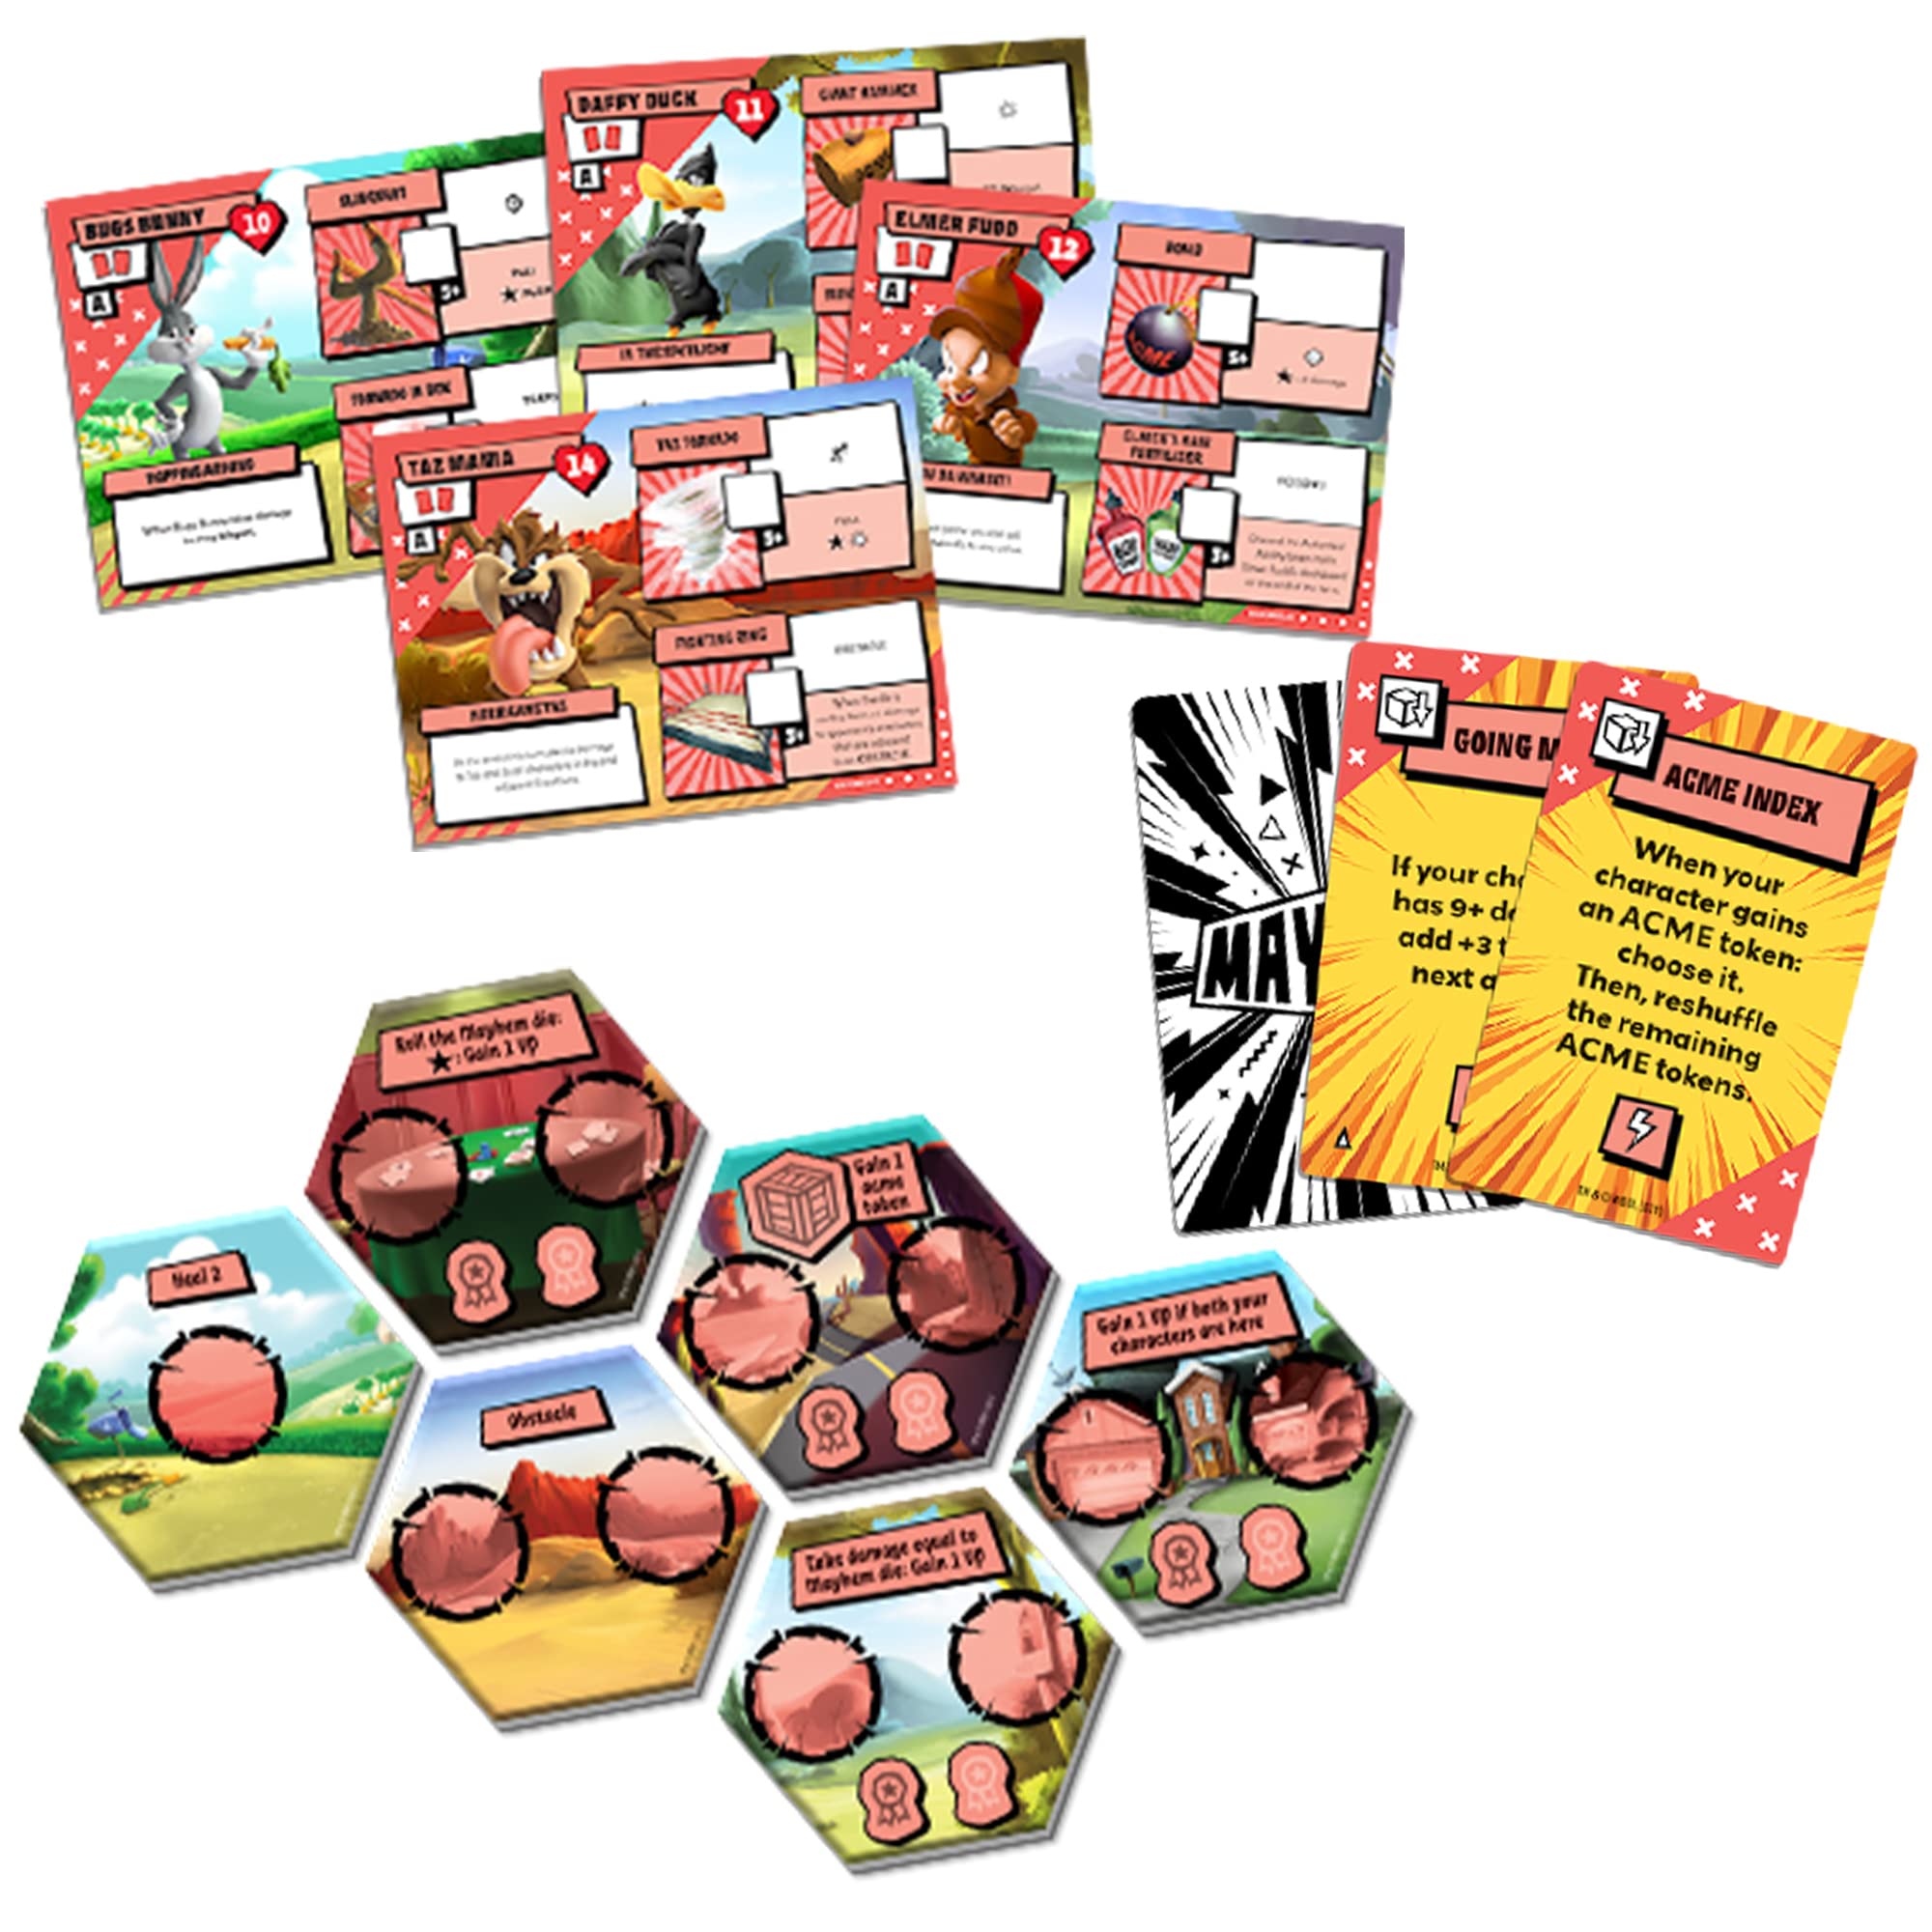 Looney Tunes Mayhem Board Game | Strategy Game Based on The Hit TV Series | Team-Based Combat Game for Adults and Kids | Ages 10+ | 2-4 Players | Average Playtime 30 Minutes | Made by CMON